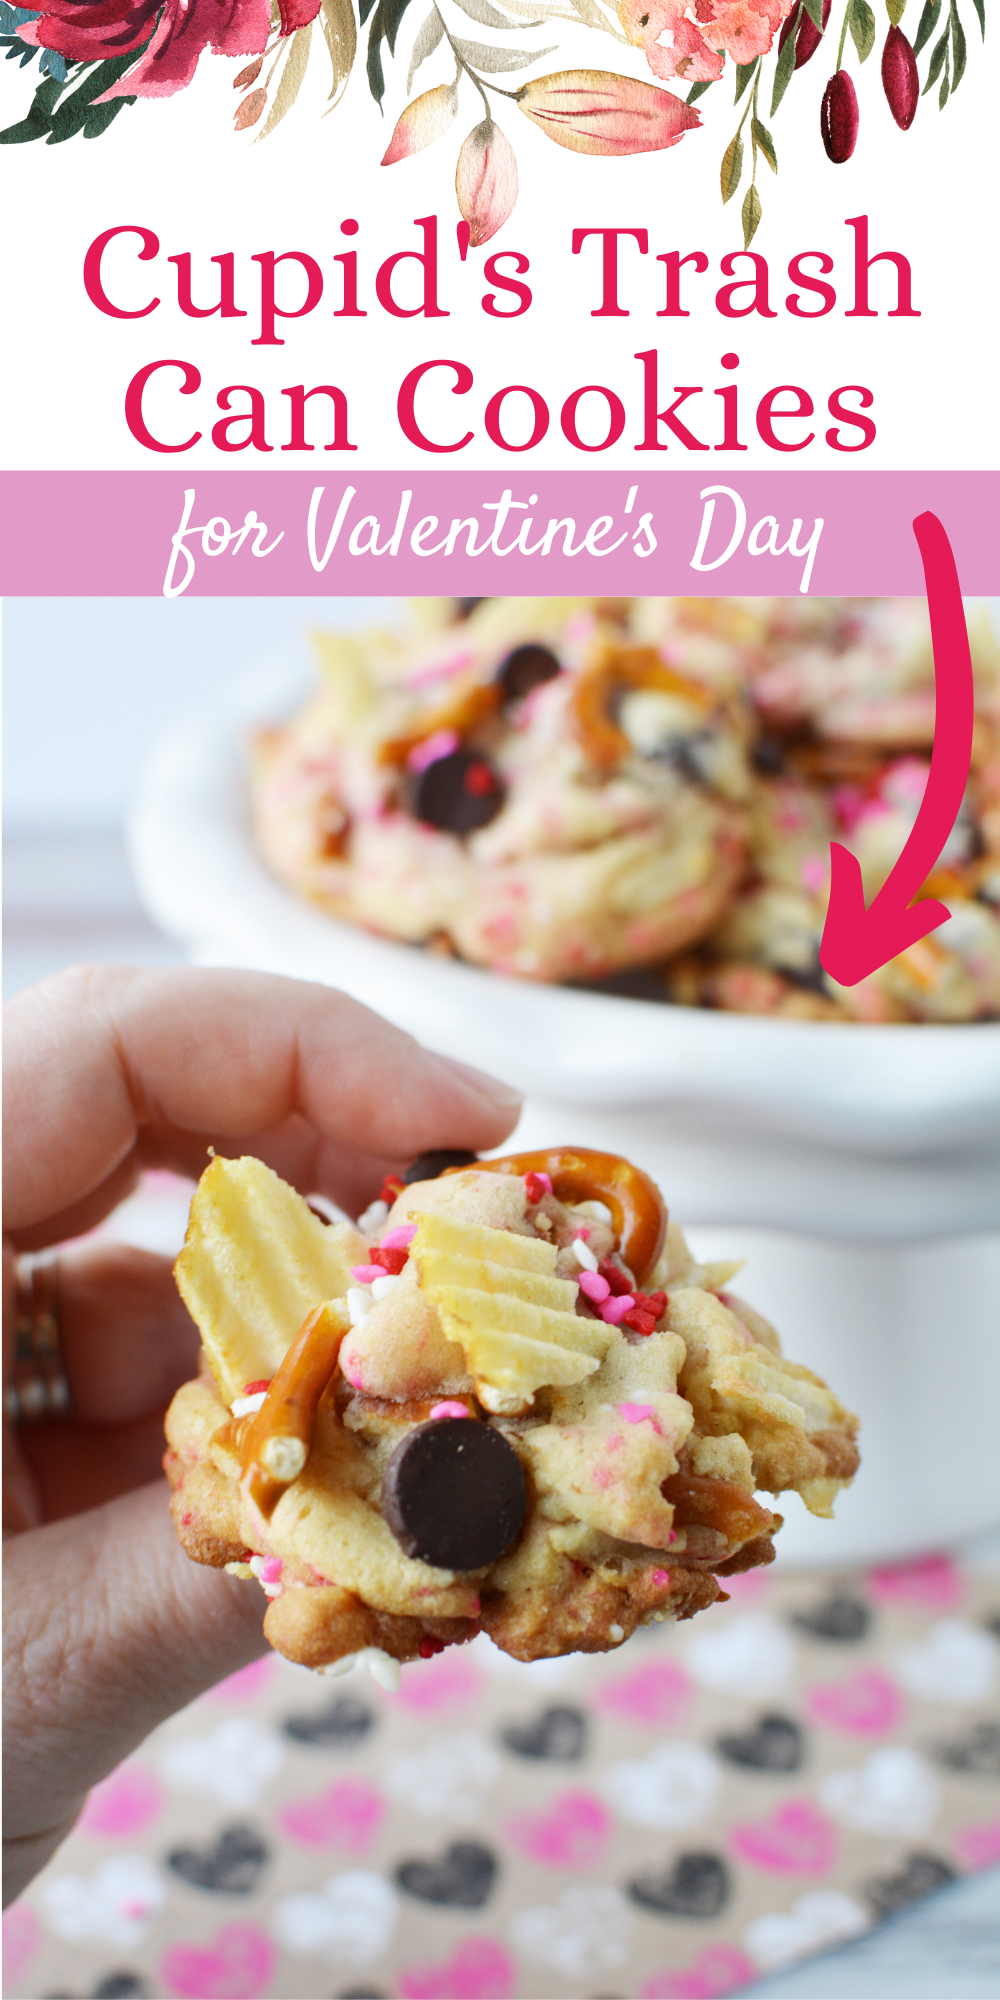 Cupid's Trash Cookies for Valentine's Day